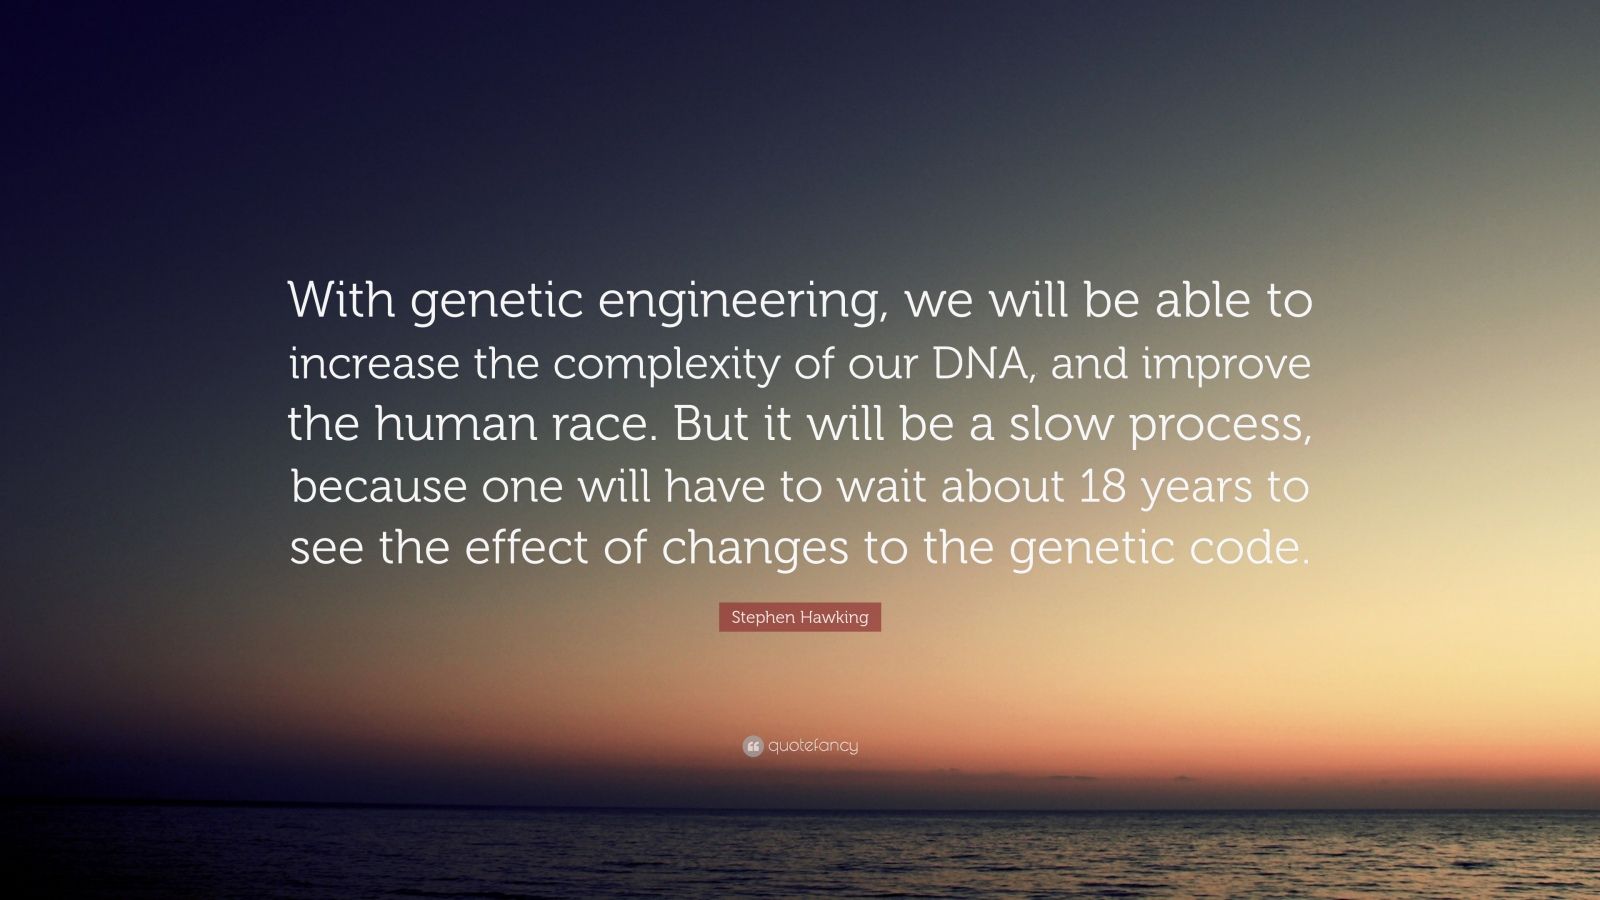 Genetic Engineering And The Human Race